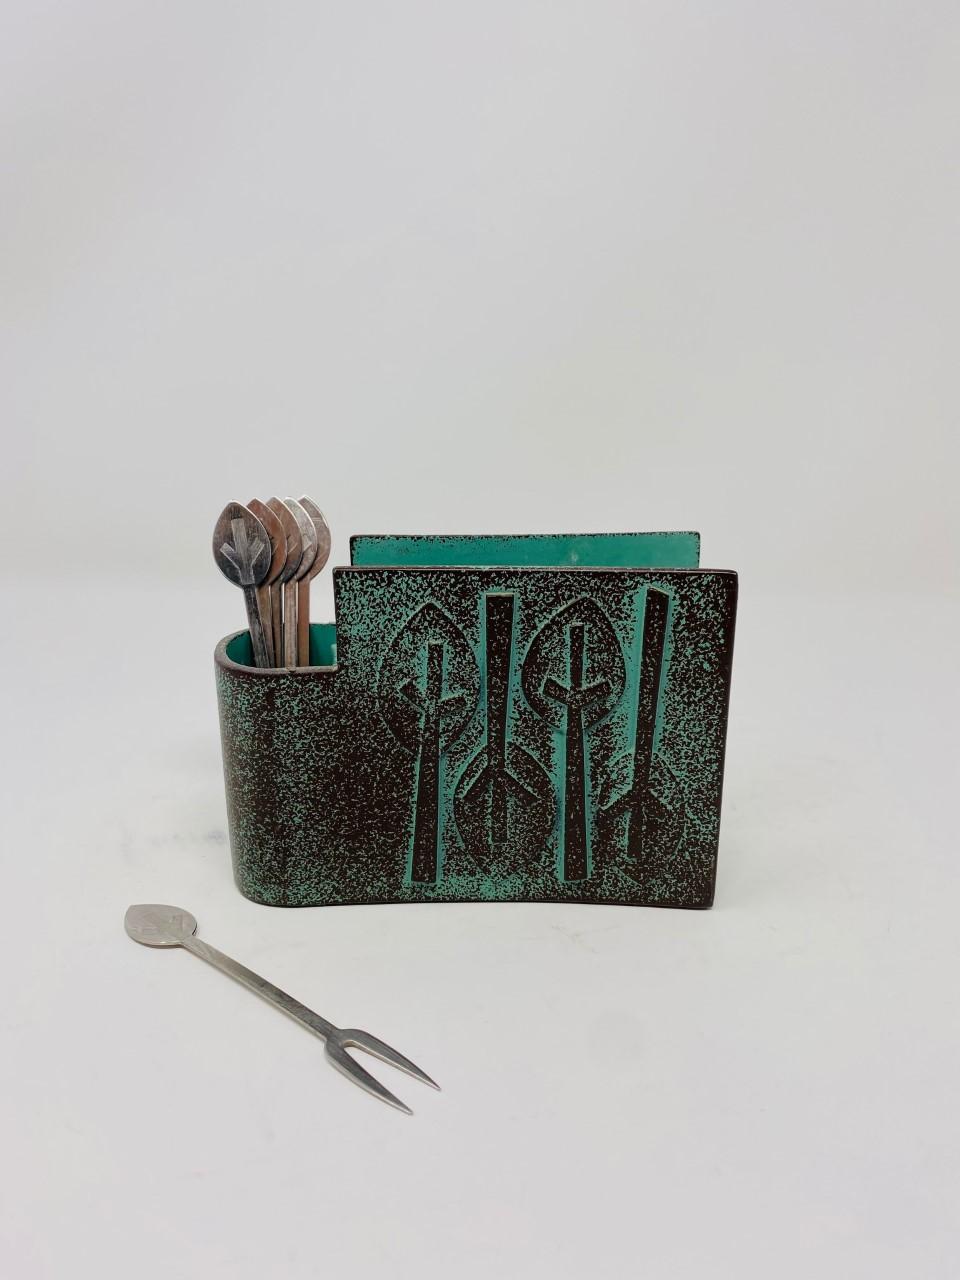 Beautifully charming vintage napkin holder with set of 6 mini forks. The set shares the same design that follows the Scandinavian mid-century aesthetic of the 1960s decade. The forks are constructed in an aluminum metal while the napkin holder is